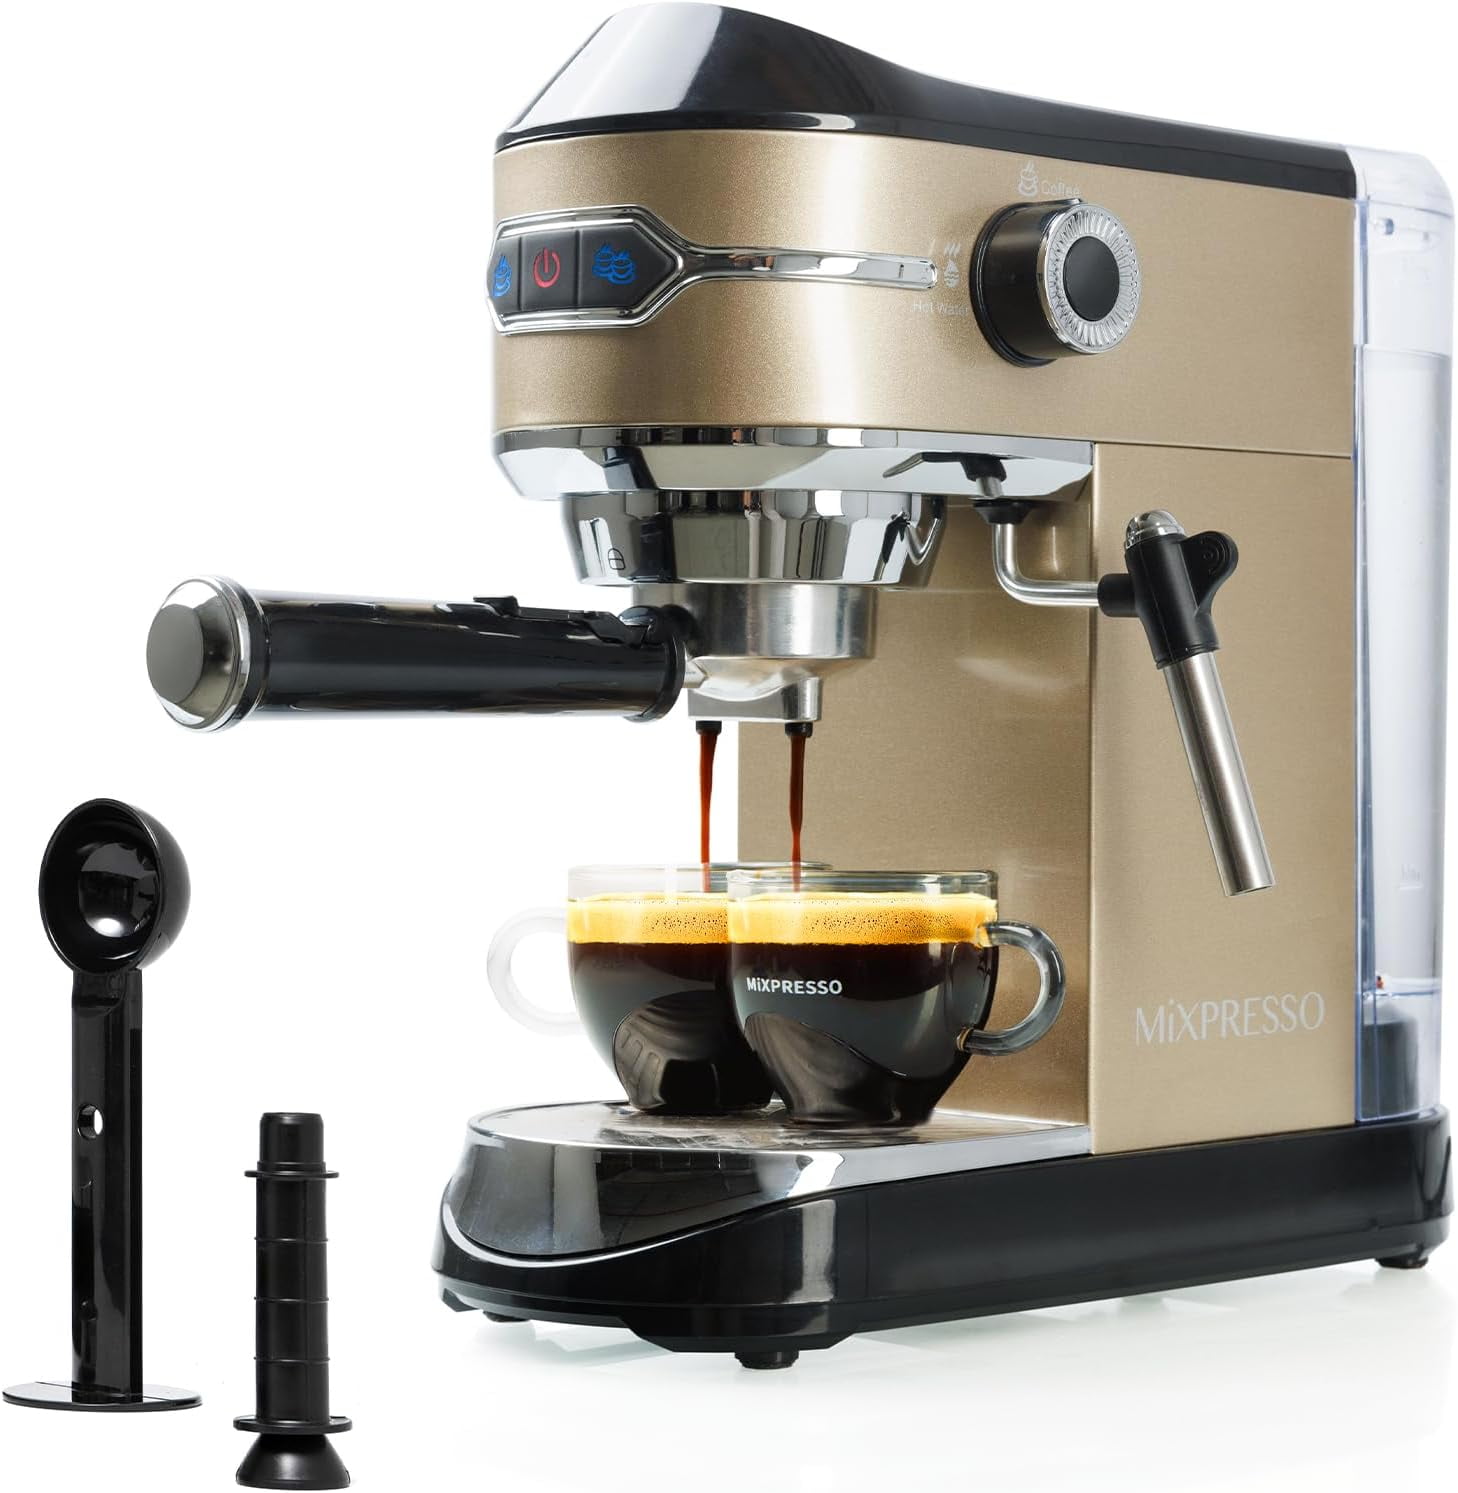 Espresso Machine with Grinder and Milk Frother/Steam Wand, 15 Bar